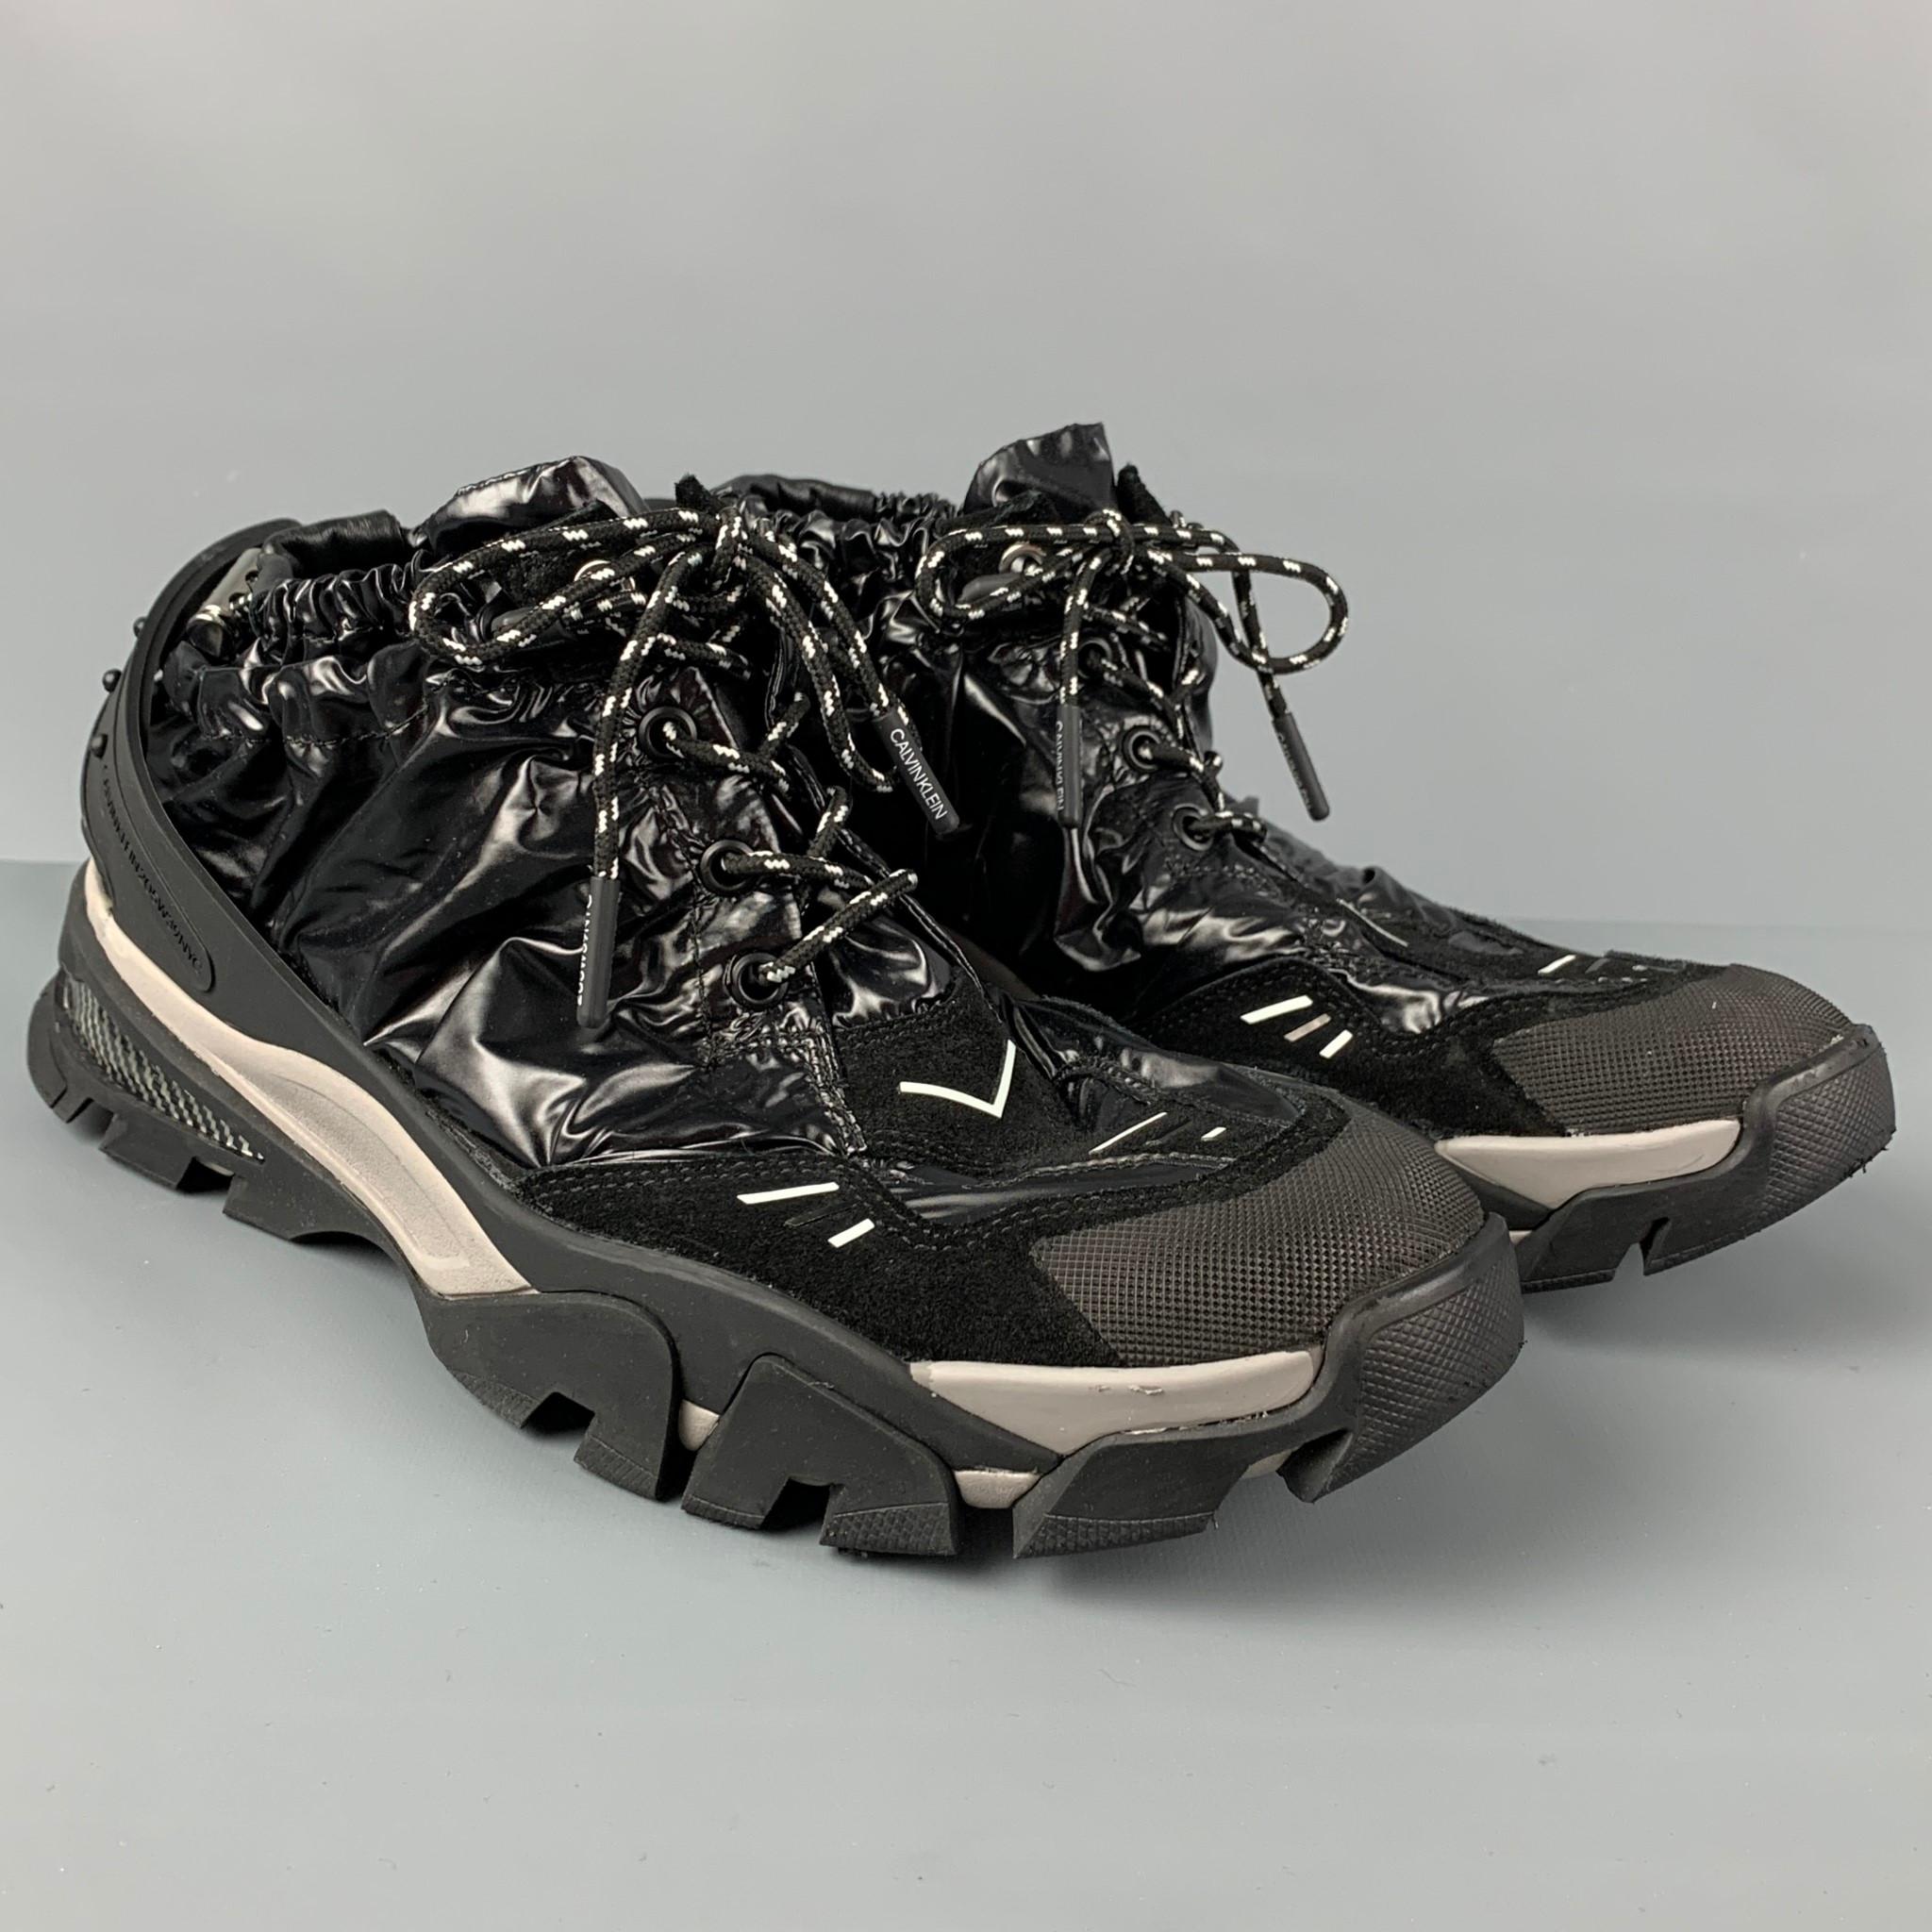 CALVIN KLEIN 205W39NYC sneakers comes in a black & grey nylon featuring a suede trim,  drawstring detail, detachable back strap, and a lace up closure. Includes box. 

Excellent Pre-Owned Condition.
Marked: 12.5
Original Retail Price: